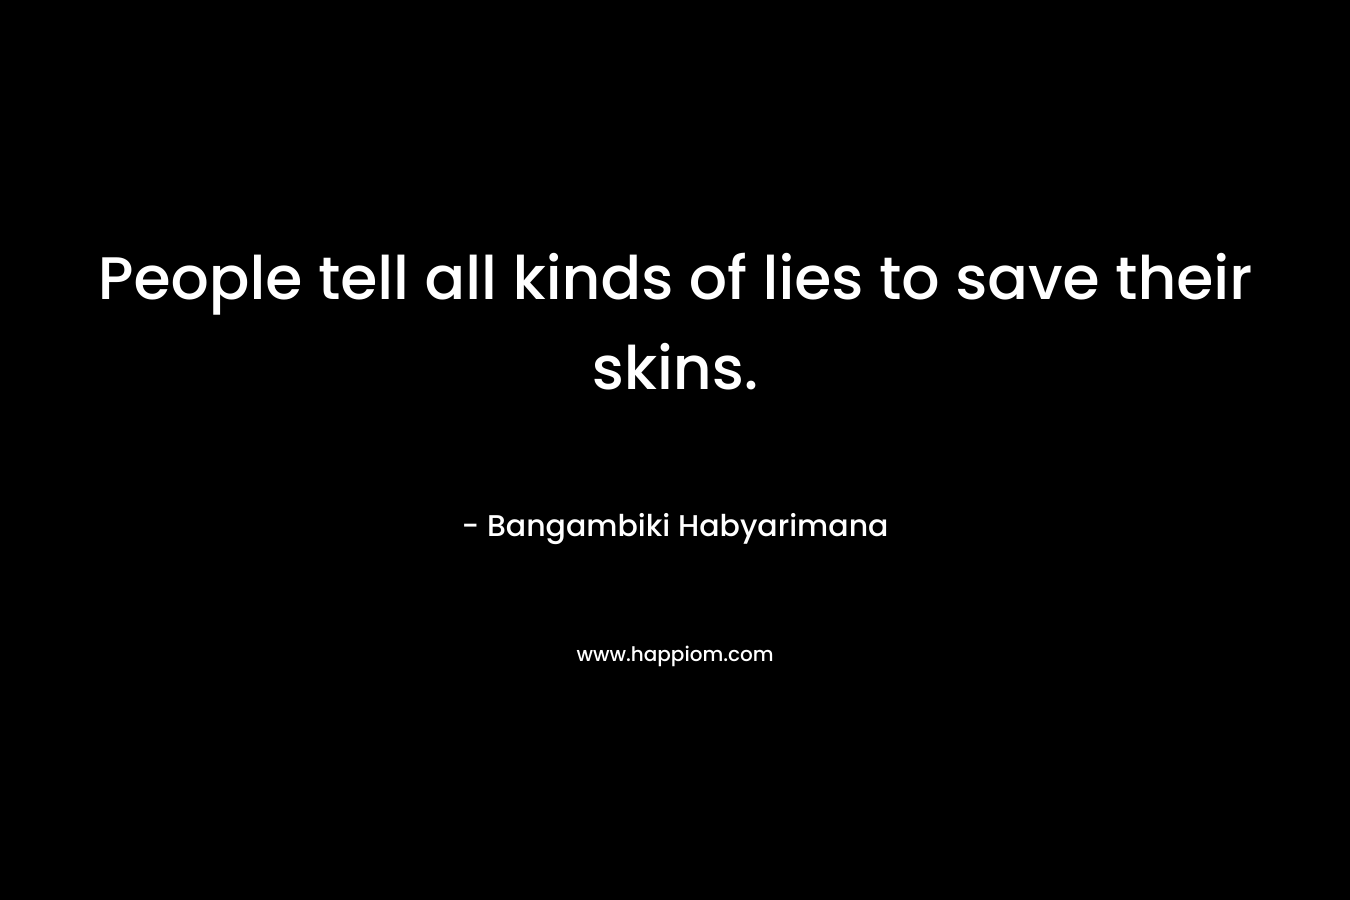 People tell all kinds of lies to save their skins. – Bangambiki Habyarimana